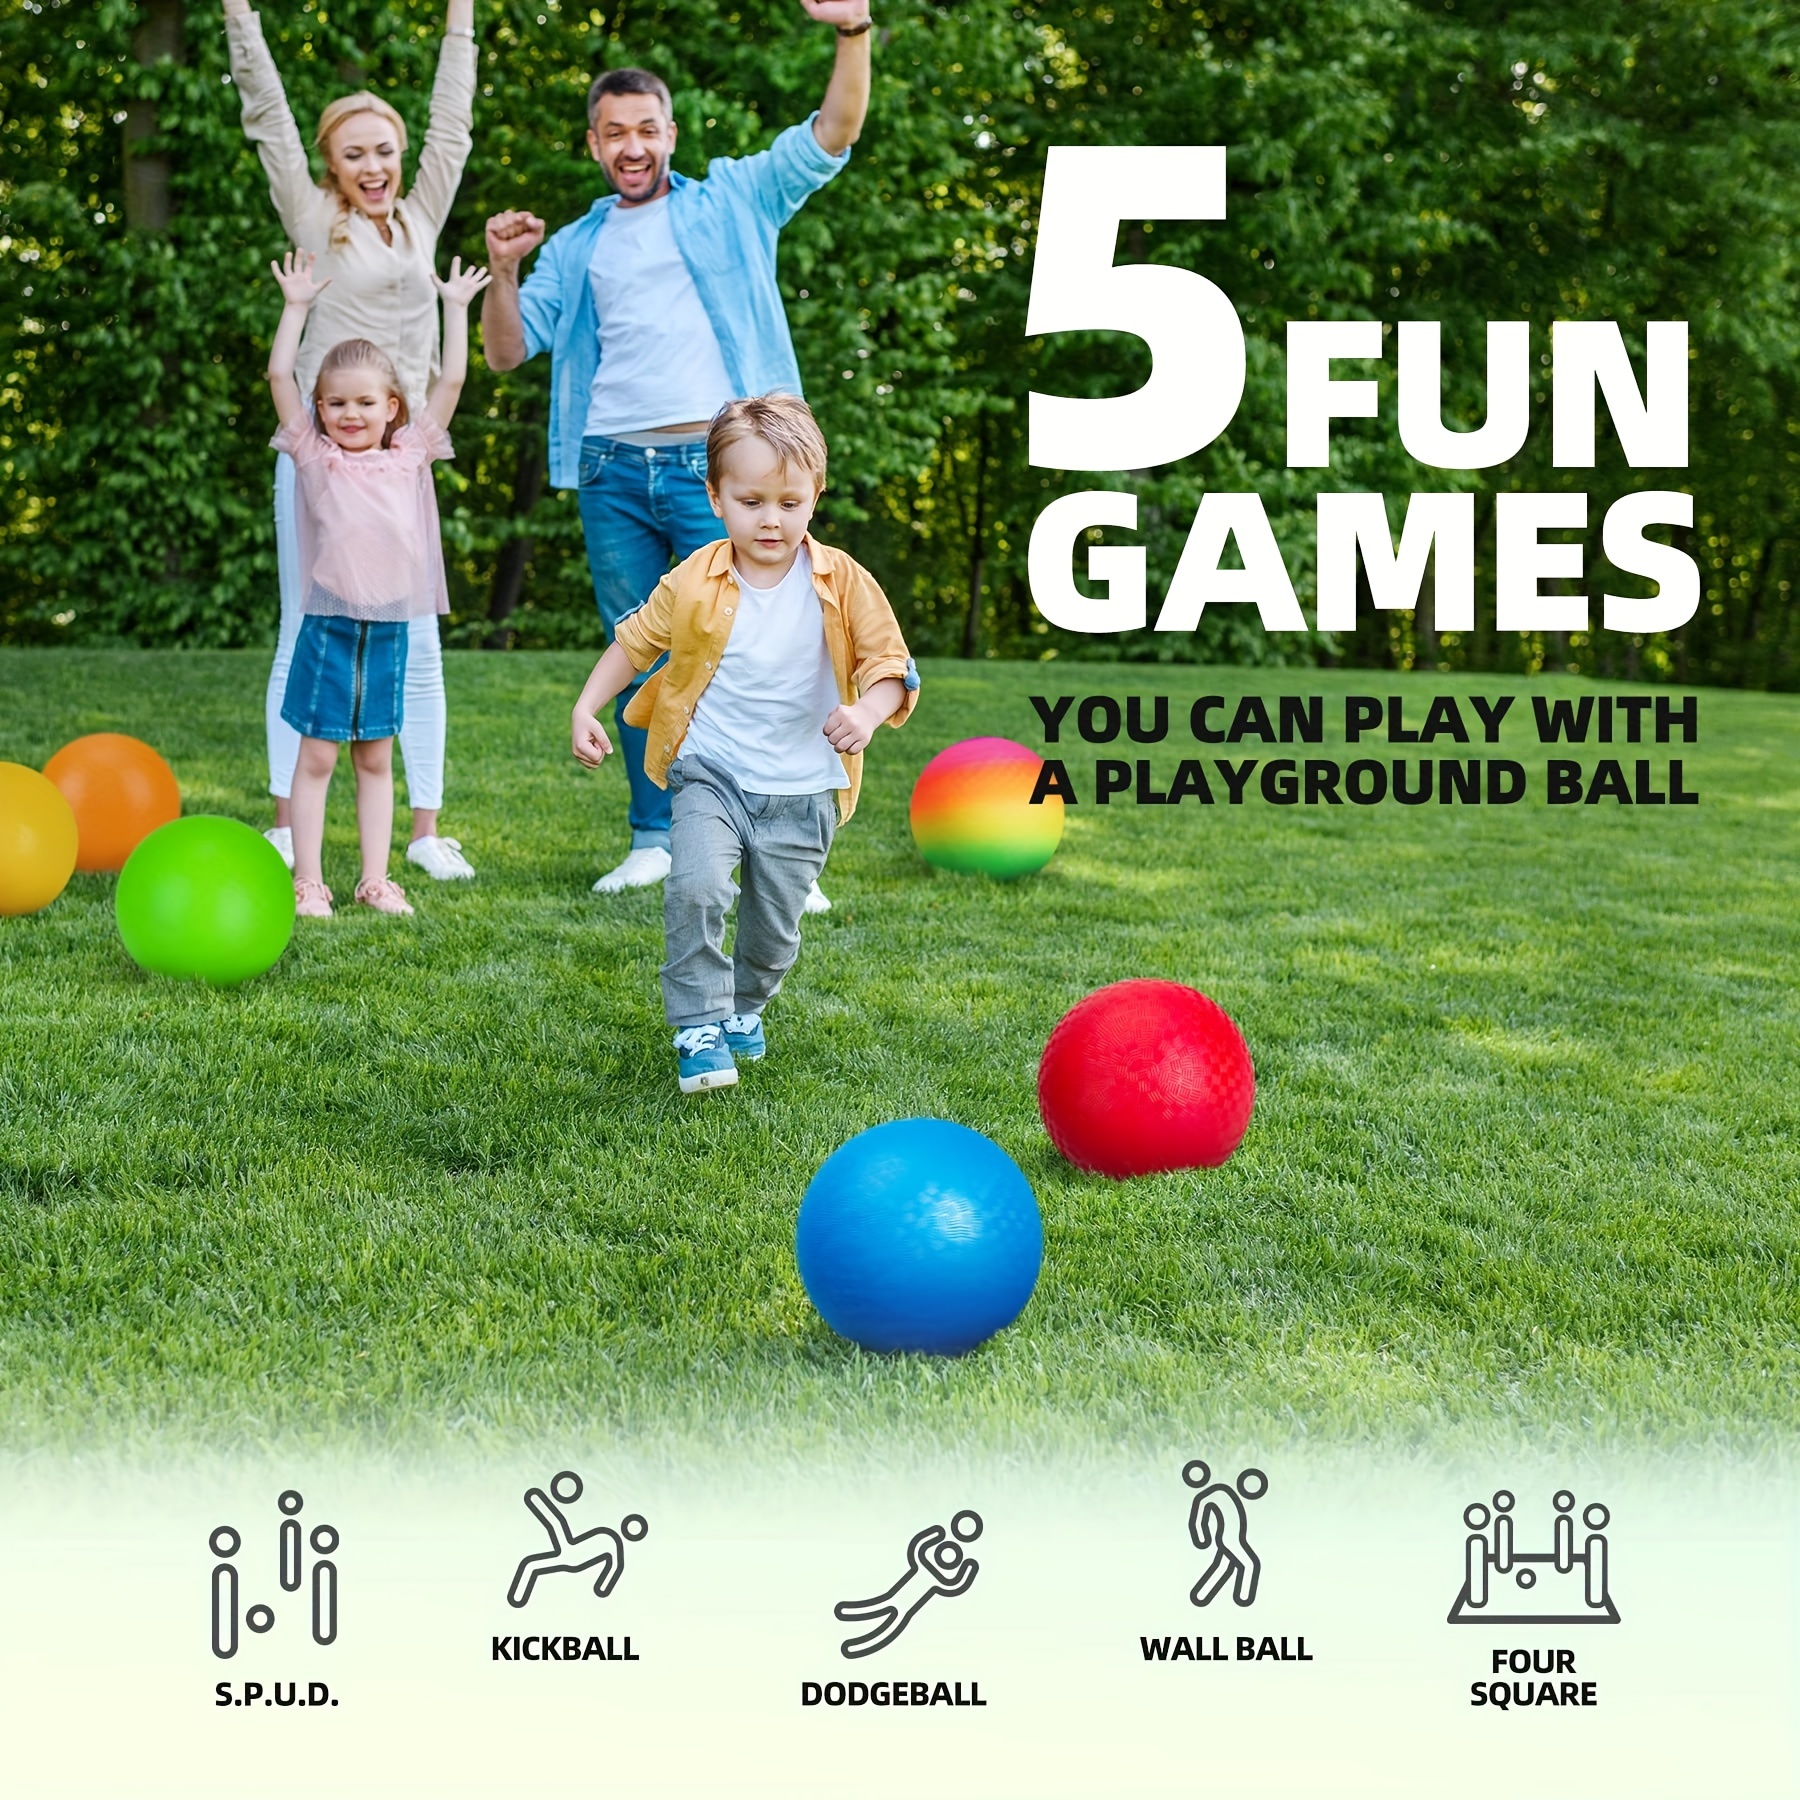 4 square game  4 square game, Outdoor yard games, Outdoor kids play area